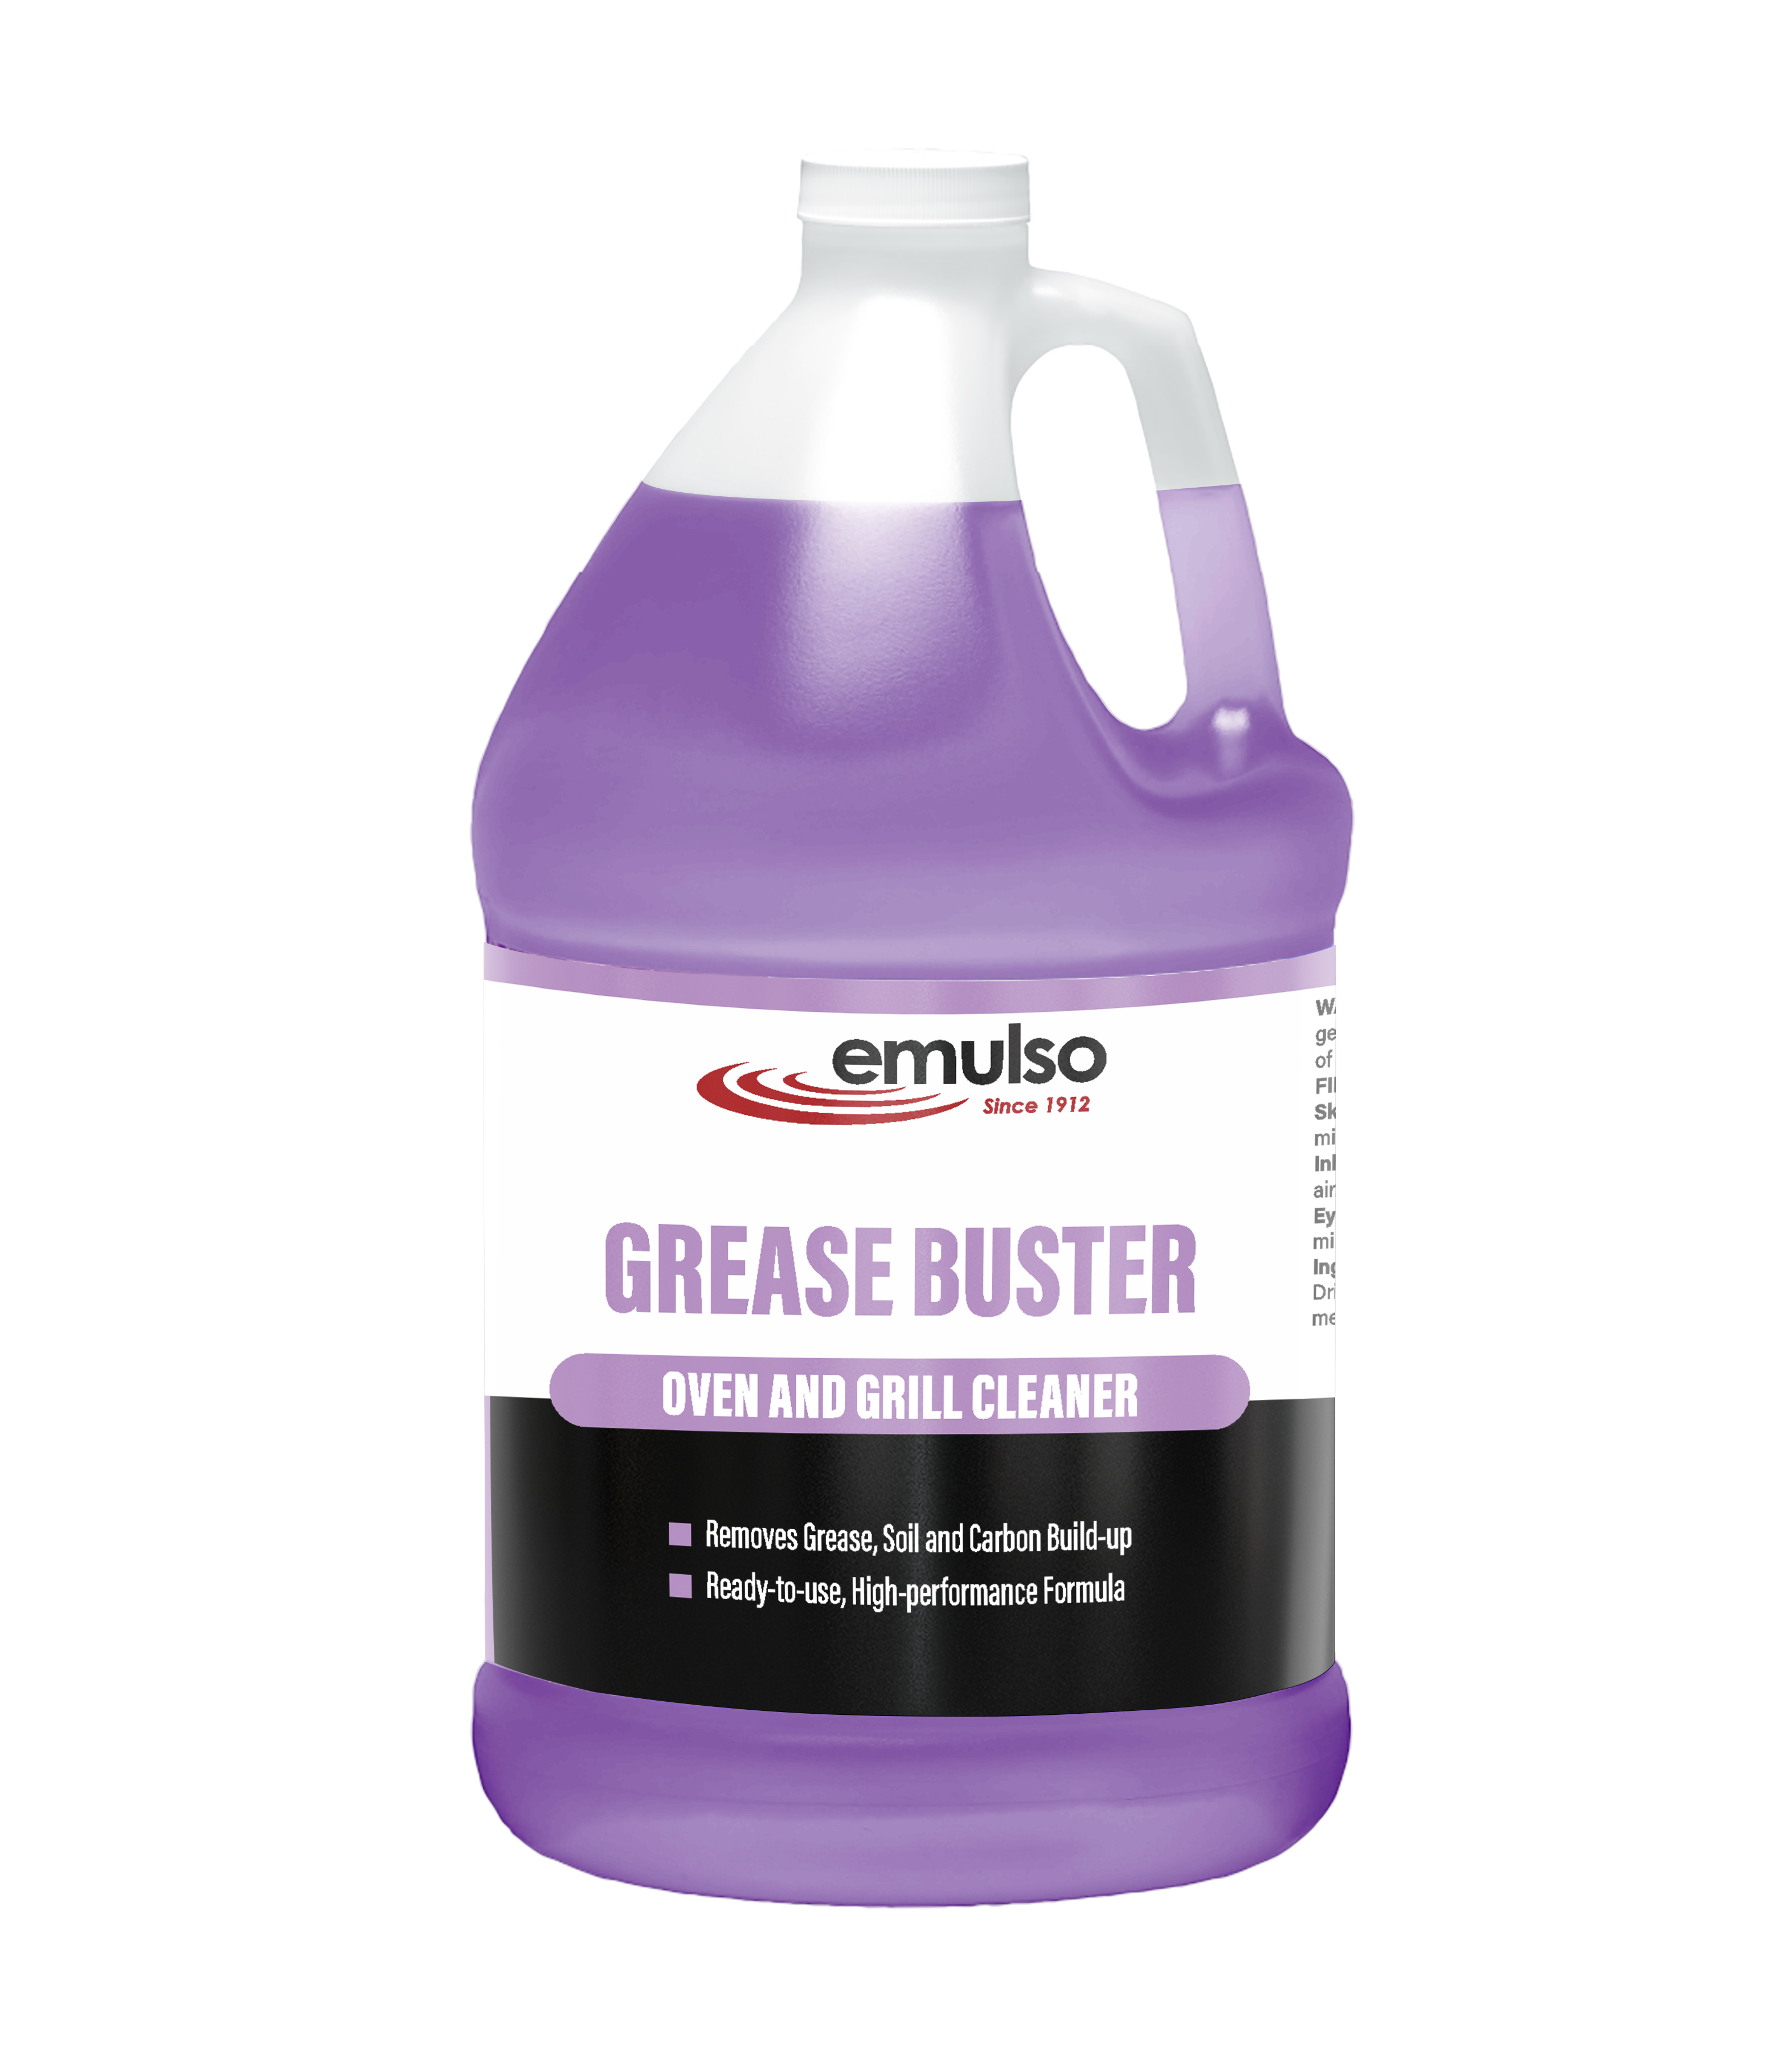 Grease Buster